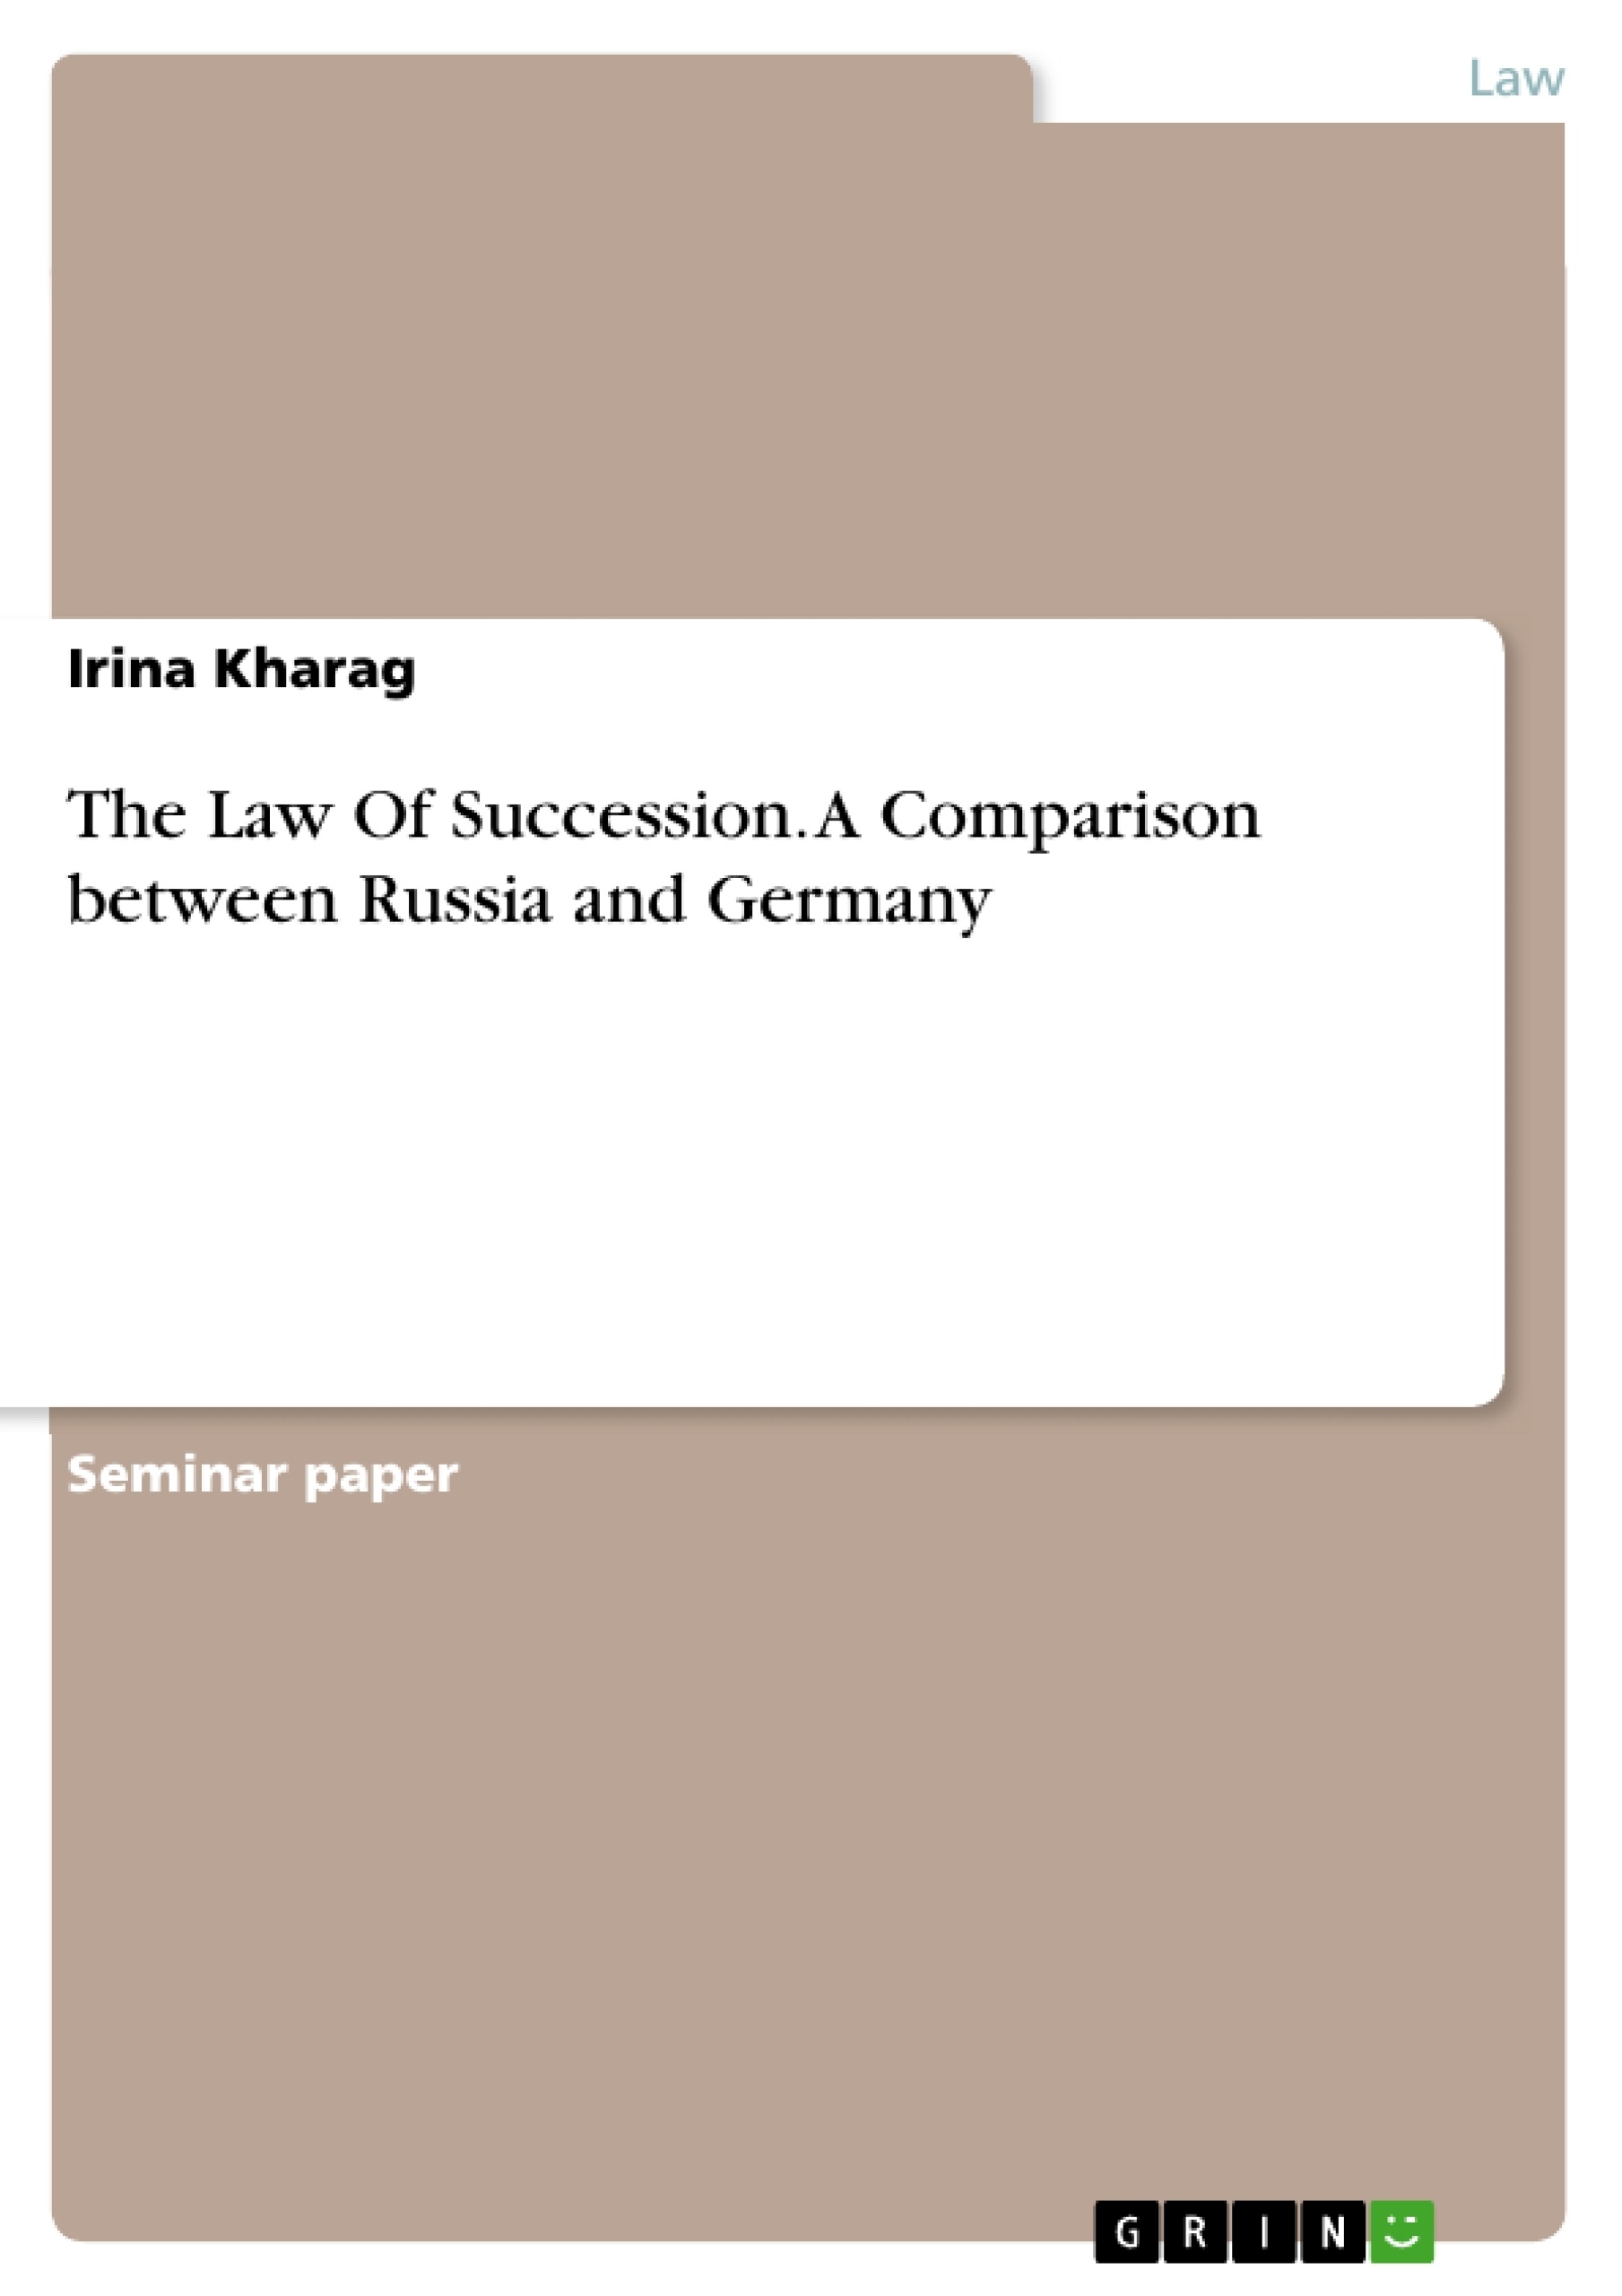 Title: The Law Of Succession. A Comparison between Russia and Germany